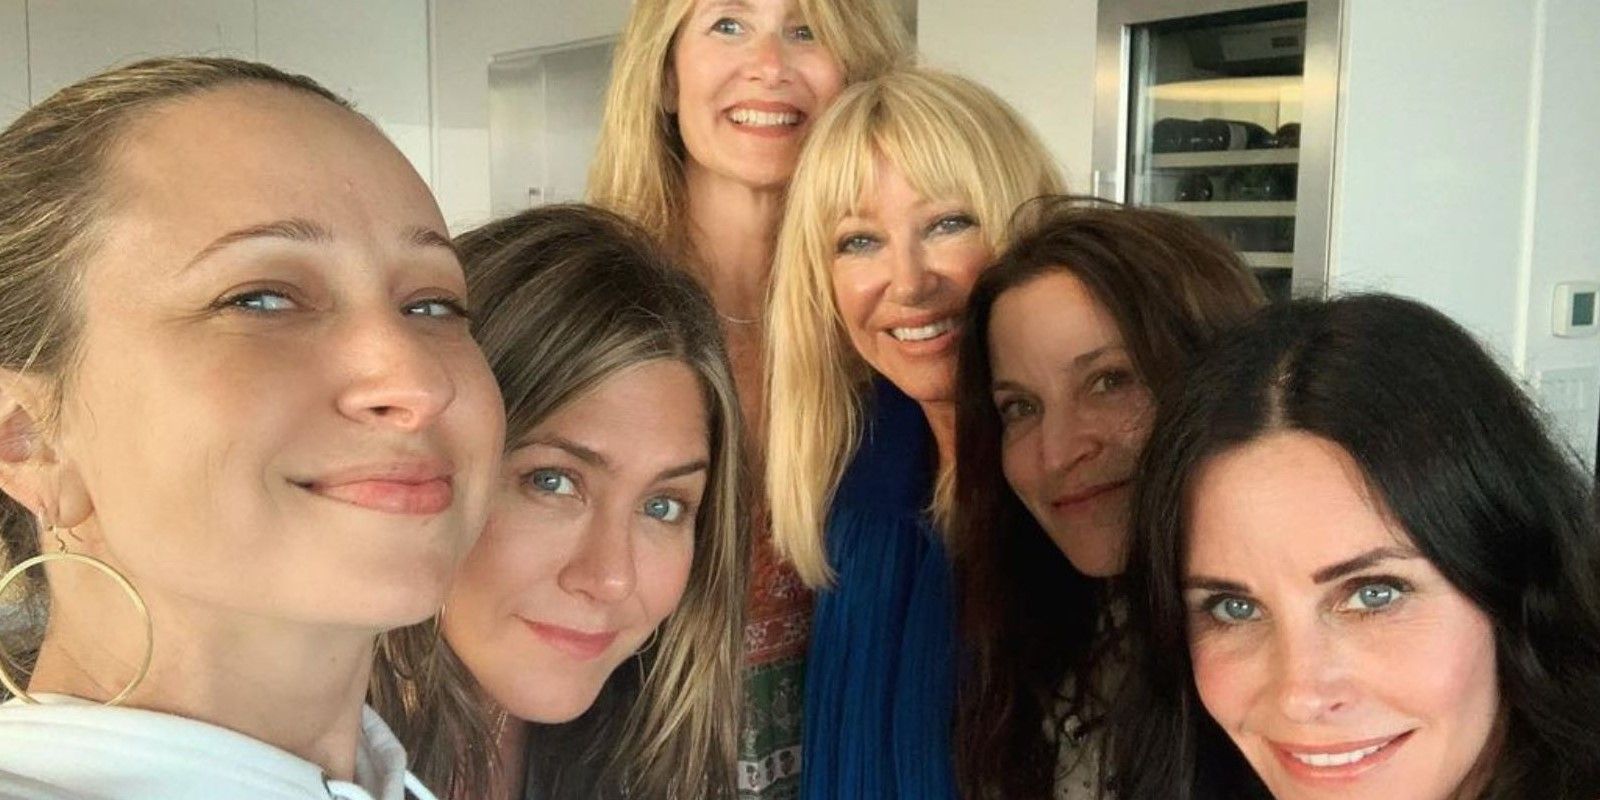 Jennifer Aniston and Courtney Cox celebrating the fourth of July together in a selfie